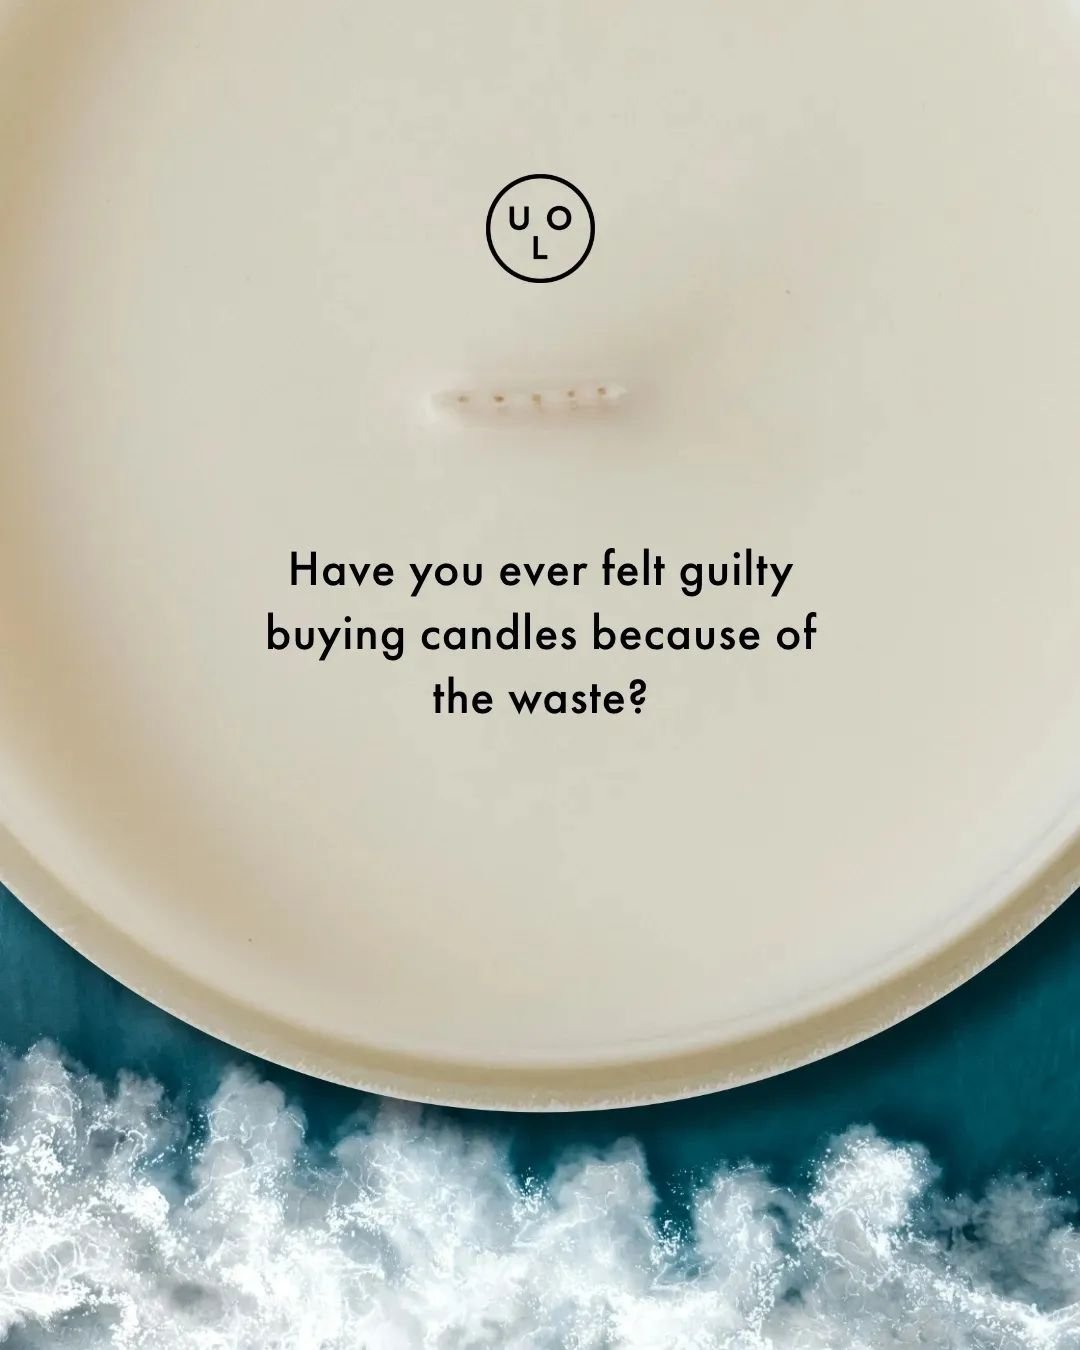 Ever felt guilty rebuying candles? Us too. But that's why we put so much effort into sourcing the votives - once you've removed the last of the wax and the label, you have a place to keep toothbrushes, whisks, hair products... Swipe for some ideas. A